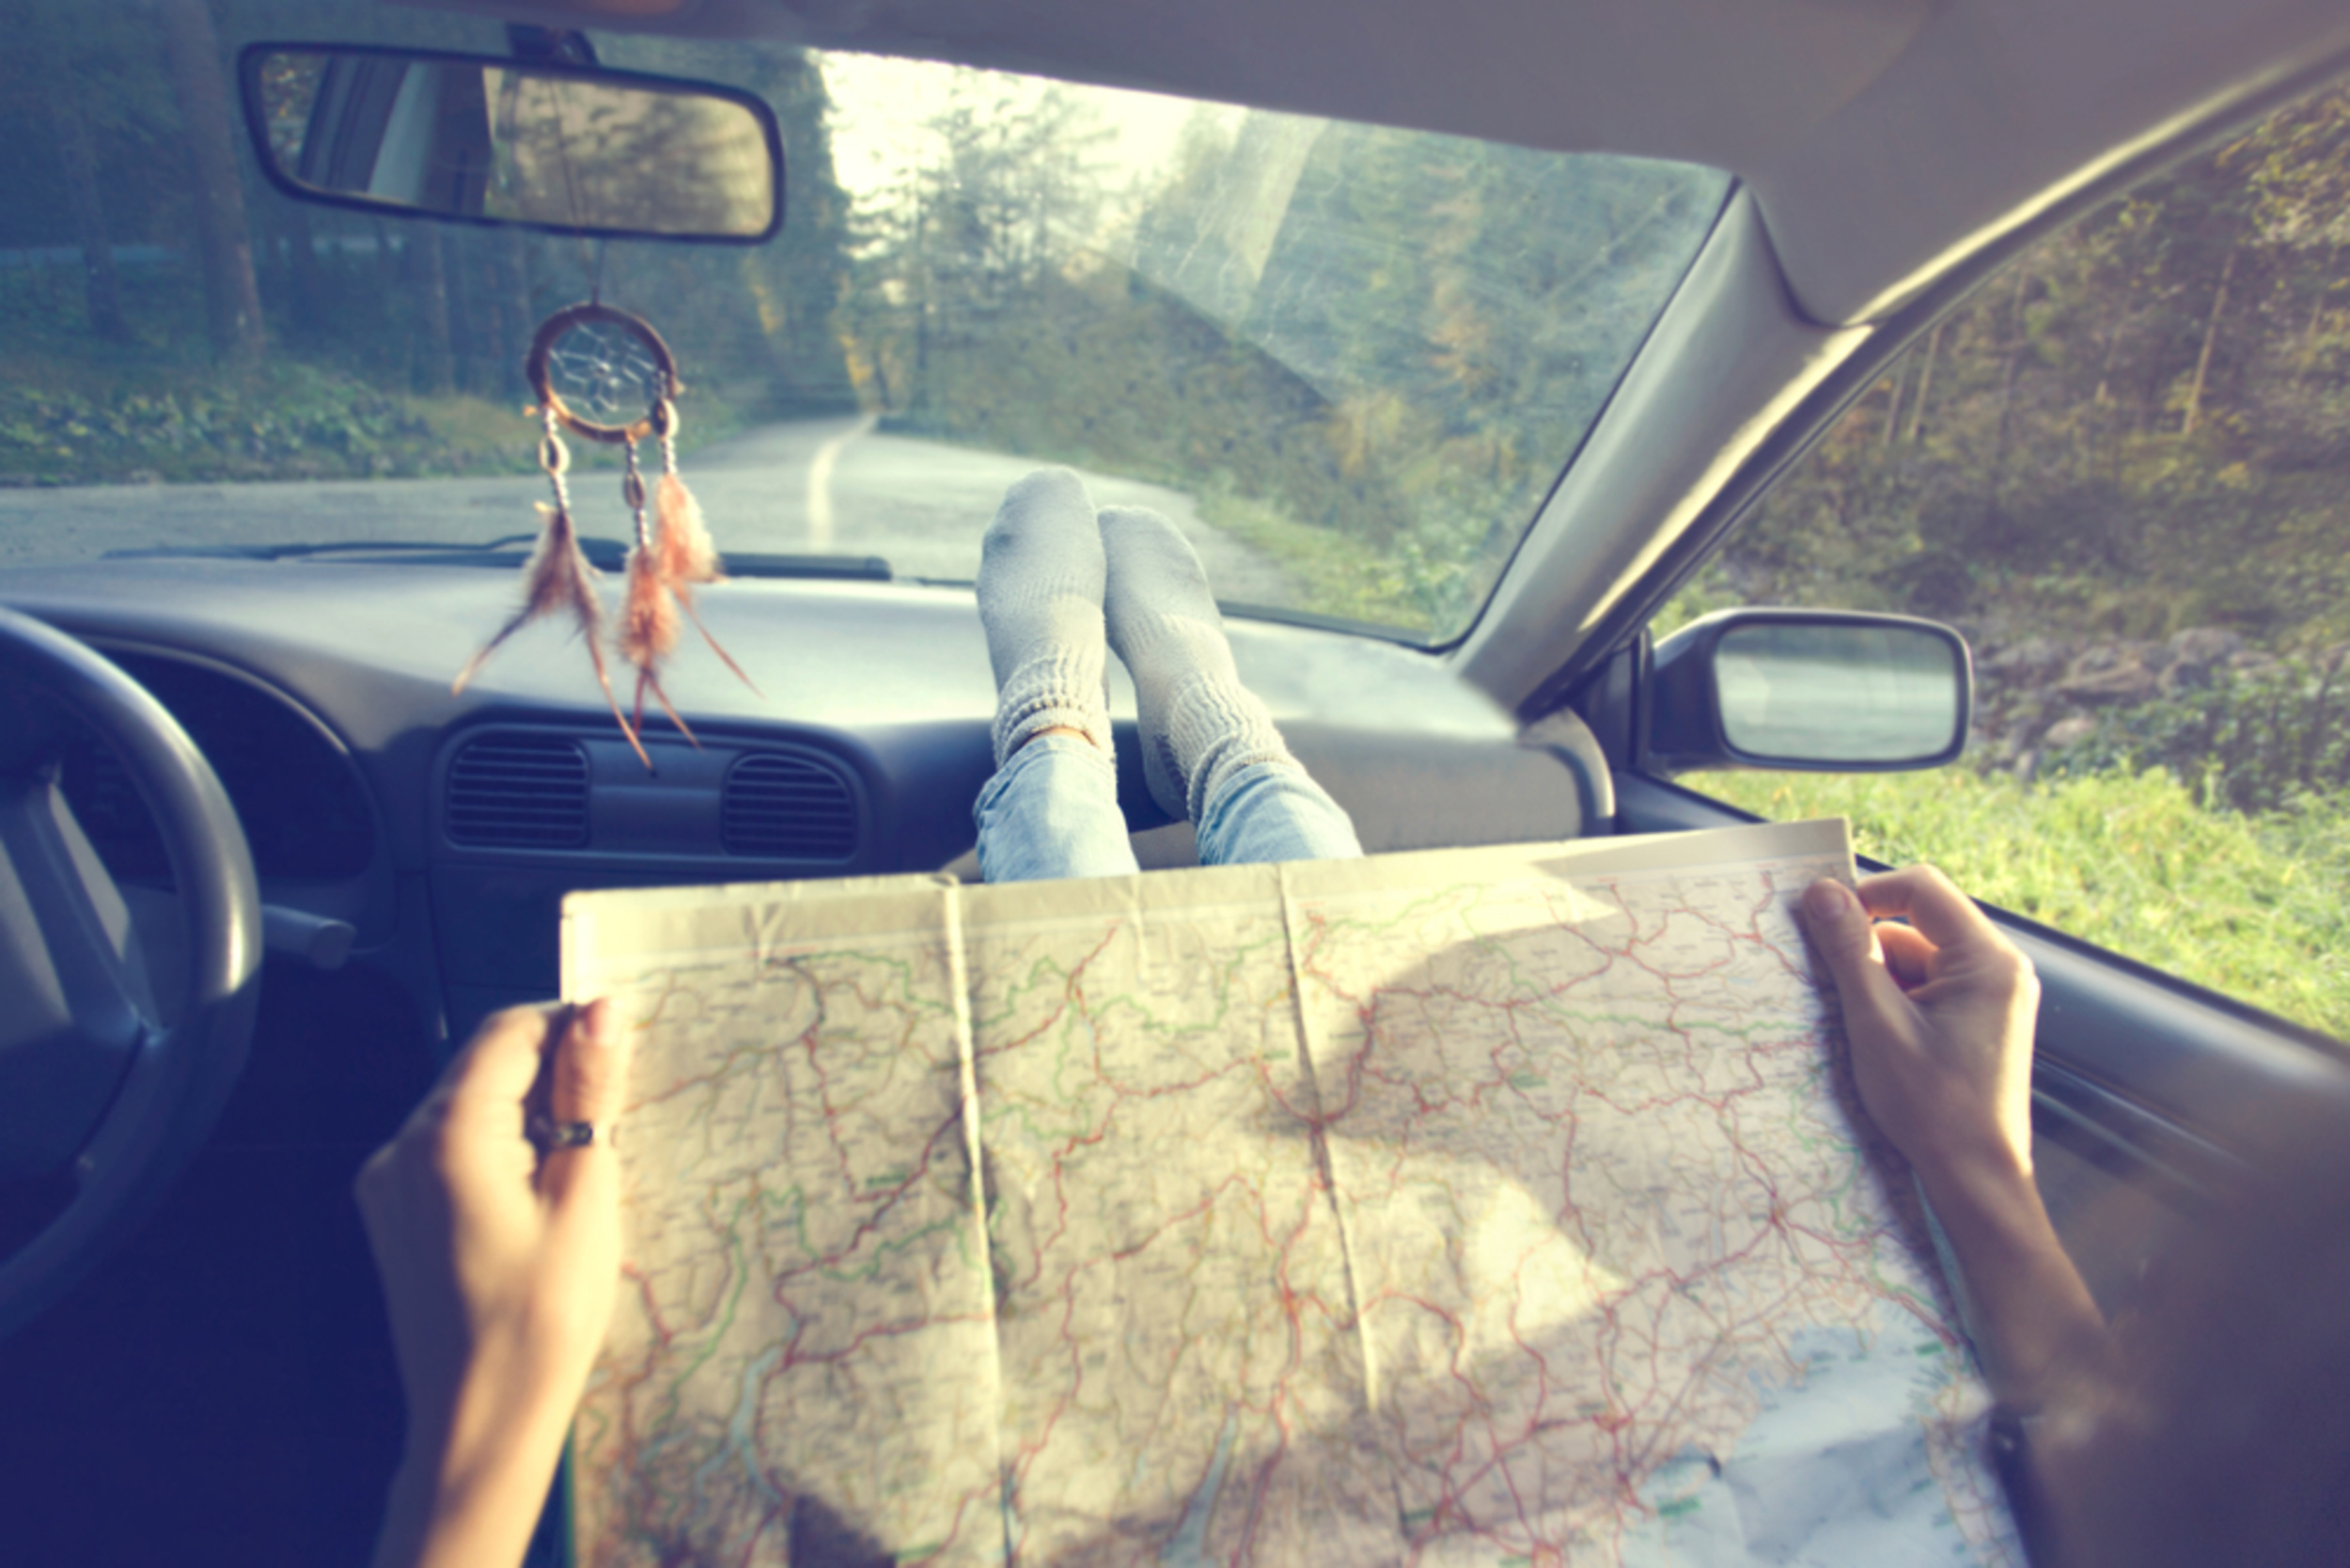 <p>Road trips are all about adventure, but having an itinerary will ensure that you don't wander so much that you're burnt out on driving. Use Google Maps to research your trip well before departure, and make sure to download your route for offline use in areas where phone service may be limited. </p><p>You may also like: <a href='https://www.yardbarker.com/lifestyle/articles/the_ultimate_temperature_guide_for_cooking_meat_and_fish/s1__35657573'>The ultimate temperature guide for cooking meat and fish</a></p>